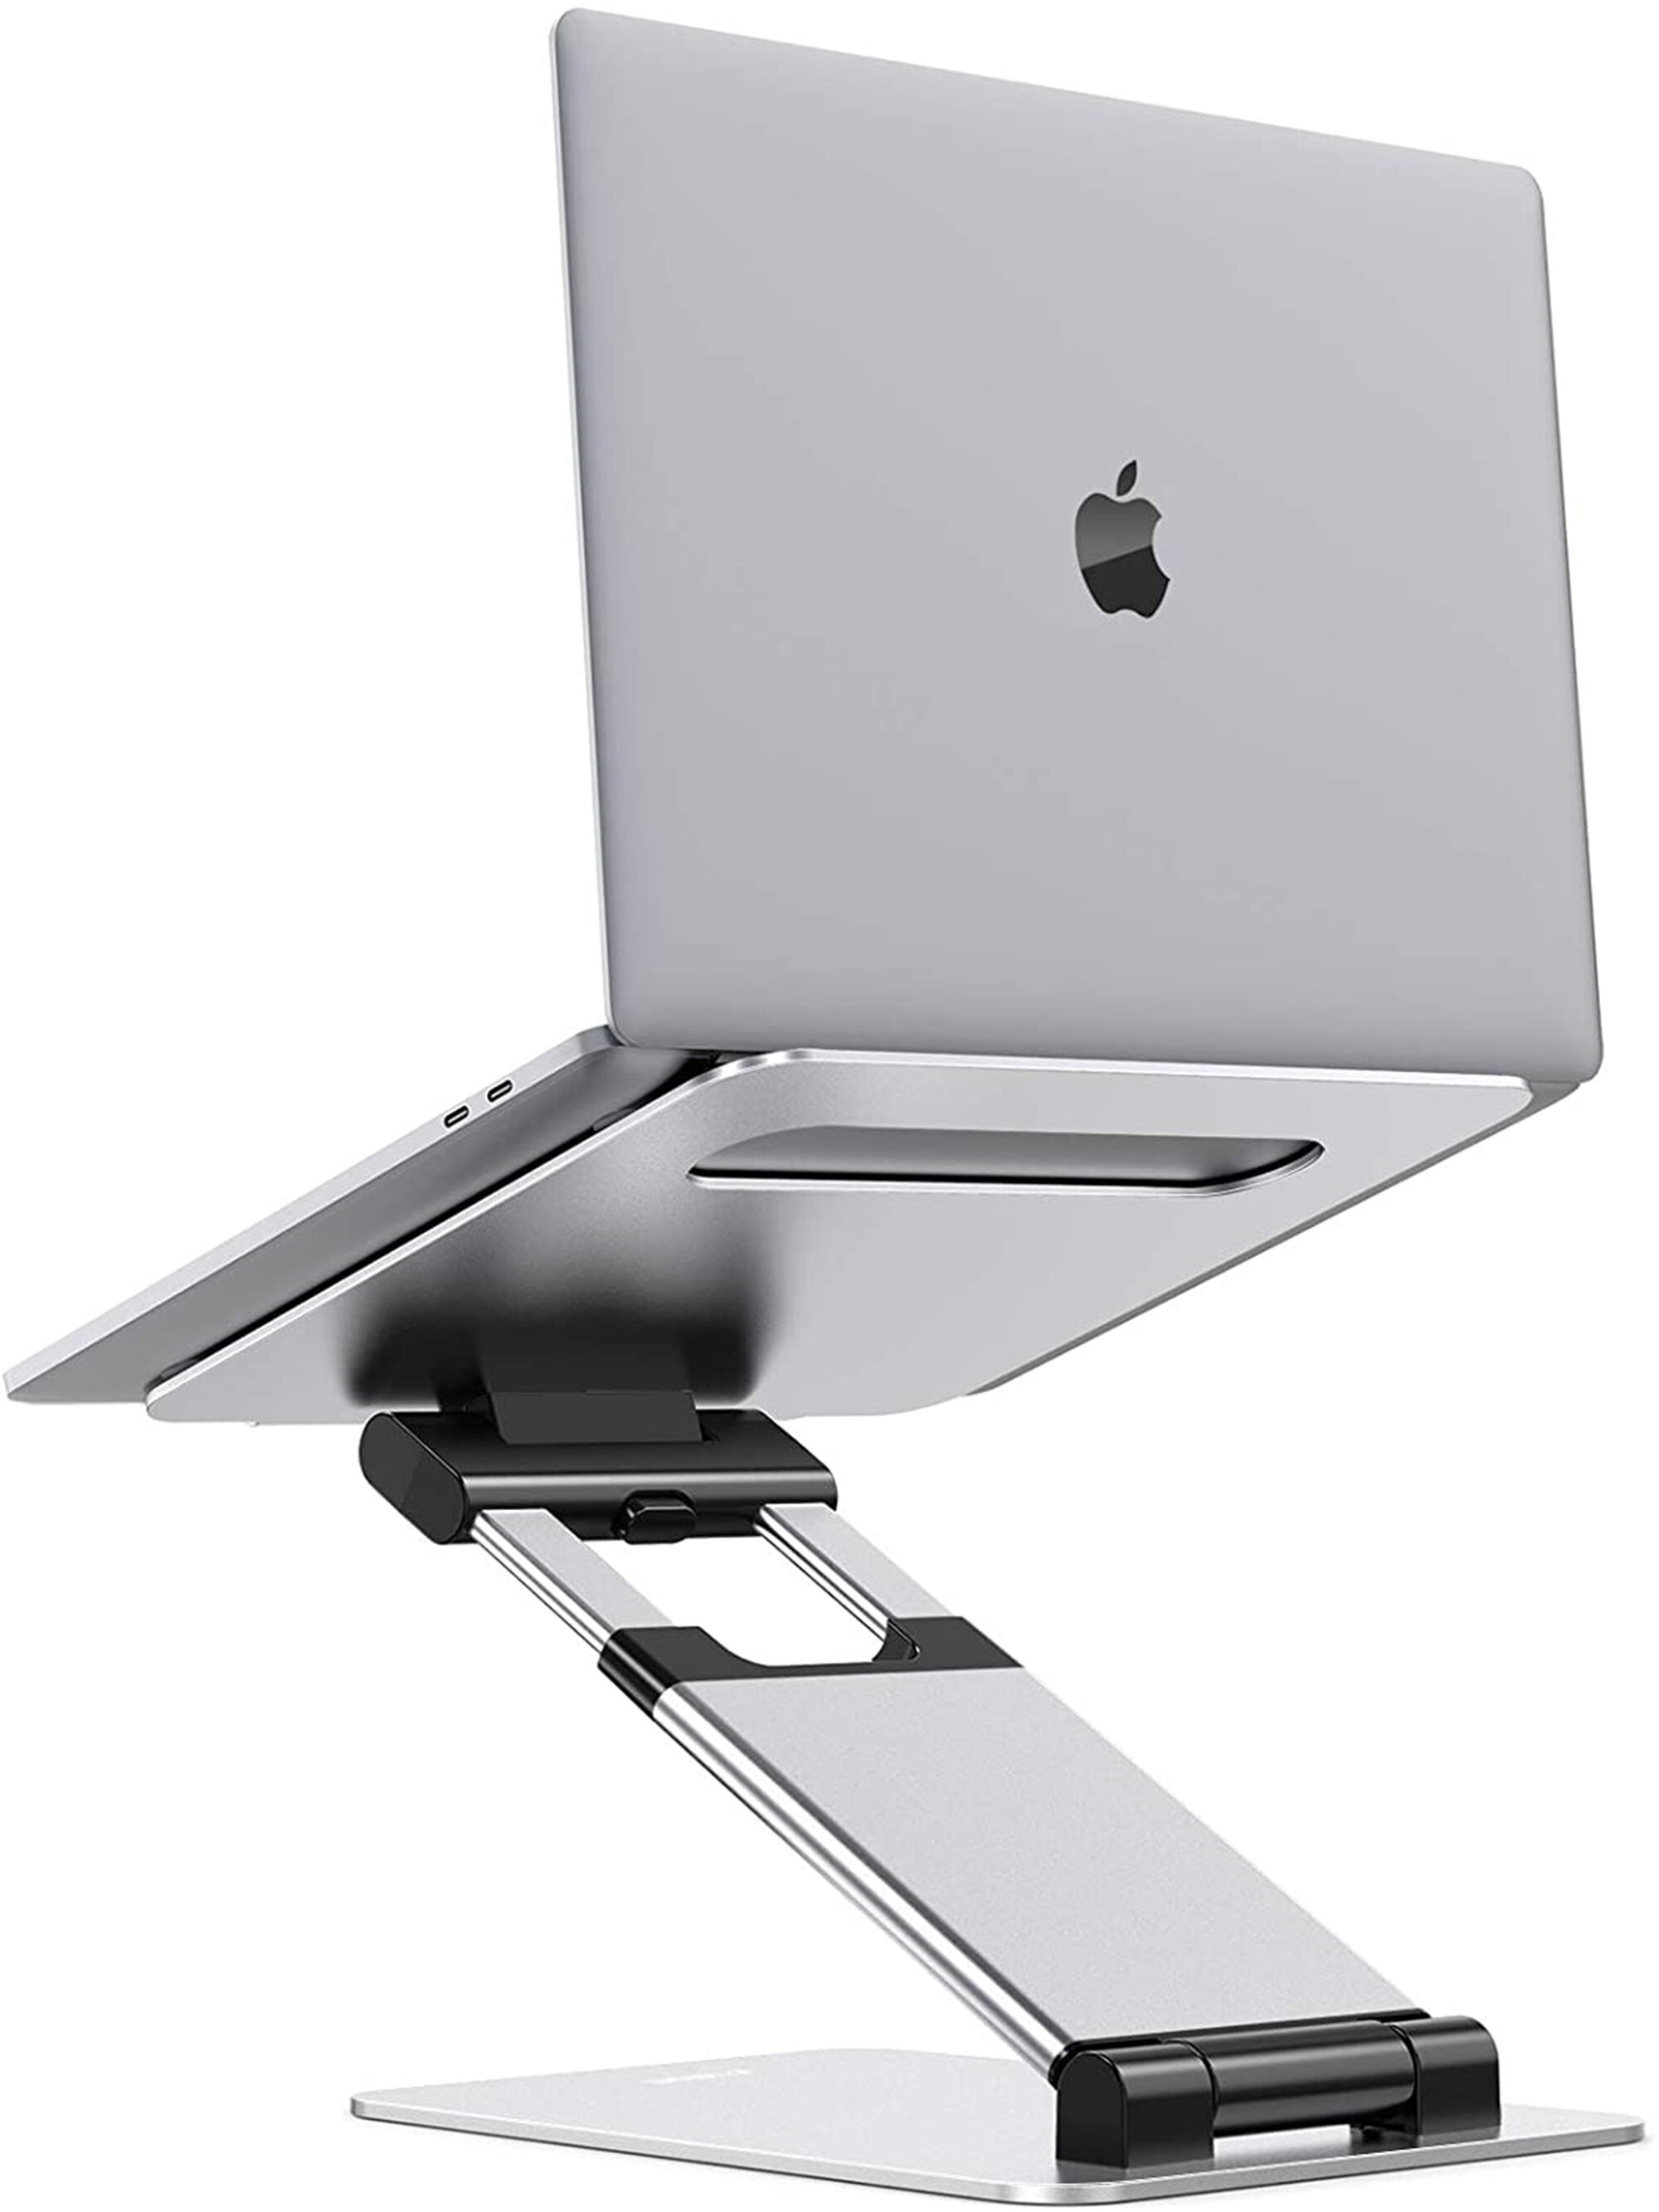 All Laptops 10-17. Samsung Ergonomic Adjustable Laptop Riser Computer Laptop Stand Compatible with MacBook Feeling-one Laptop Stand Dell XPS 